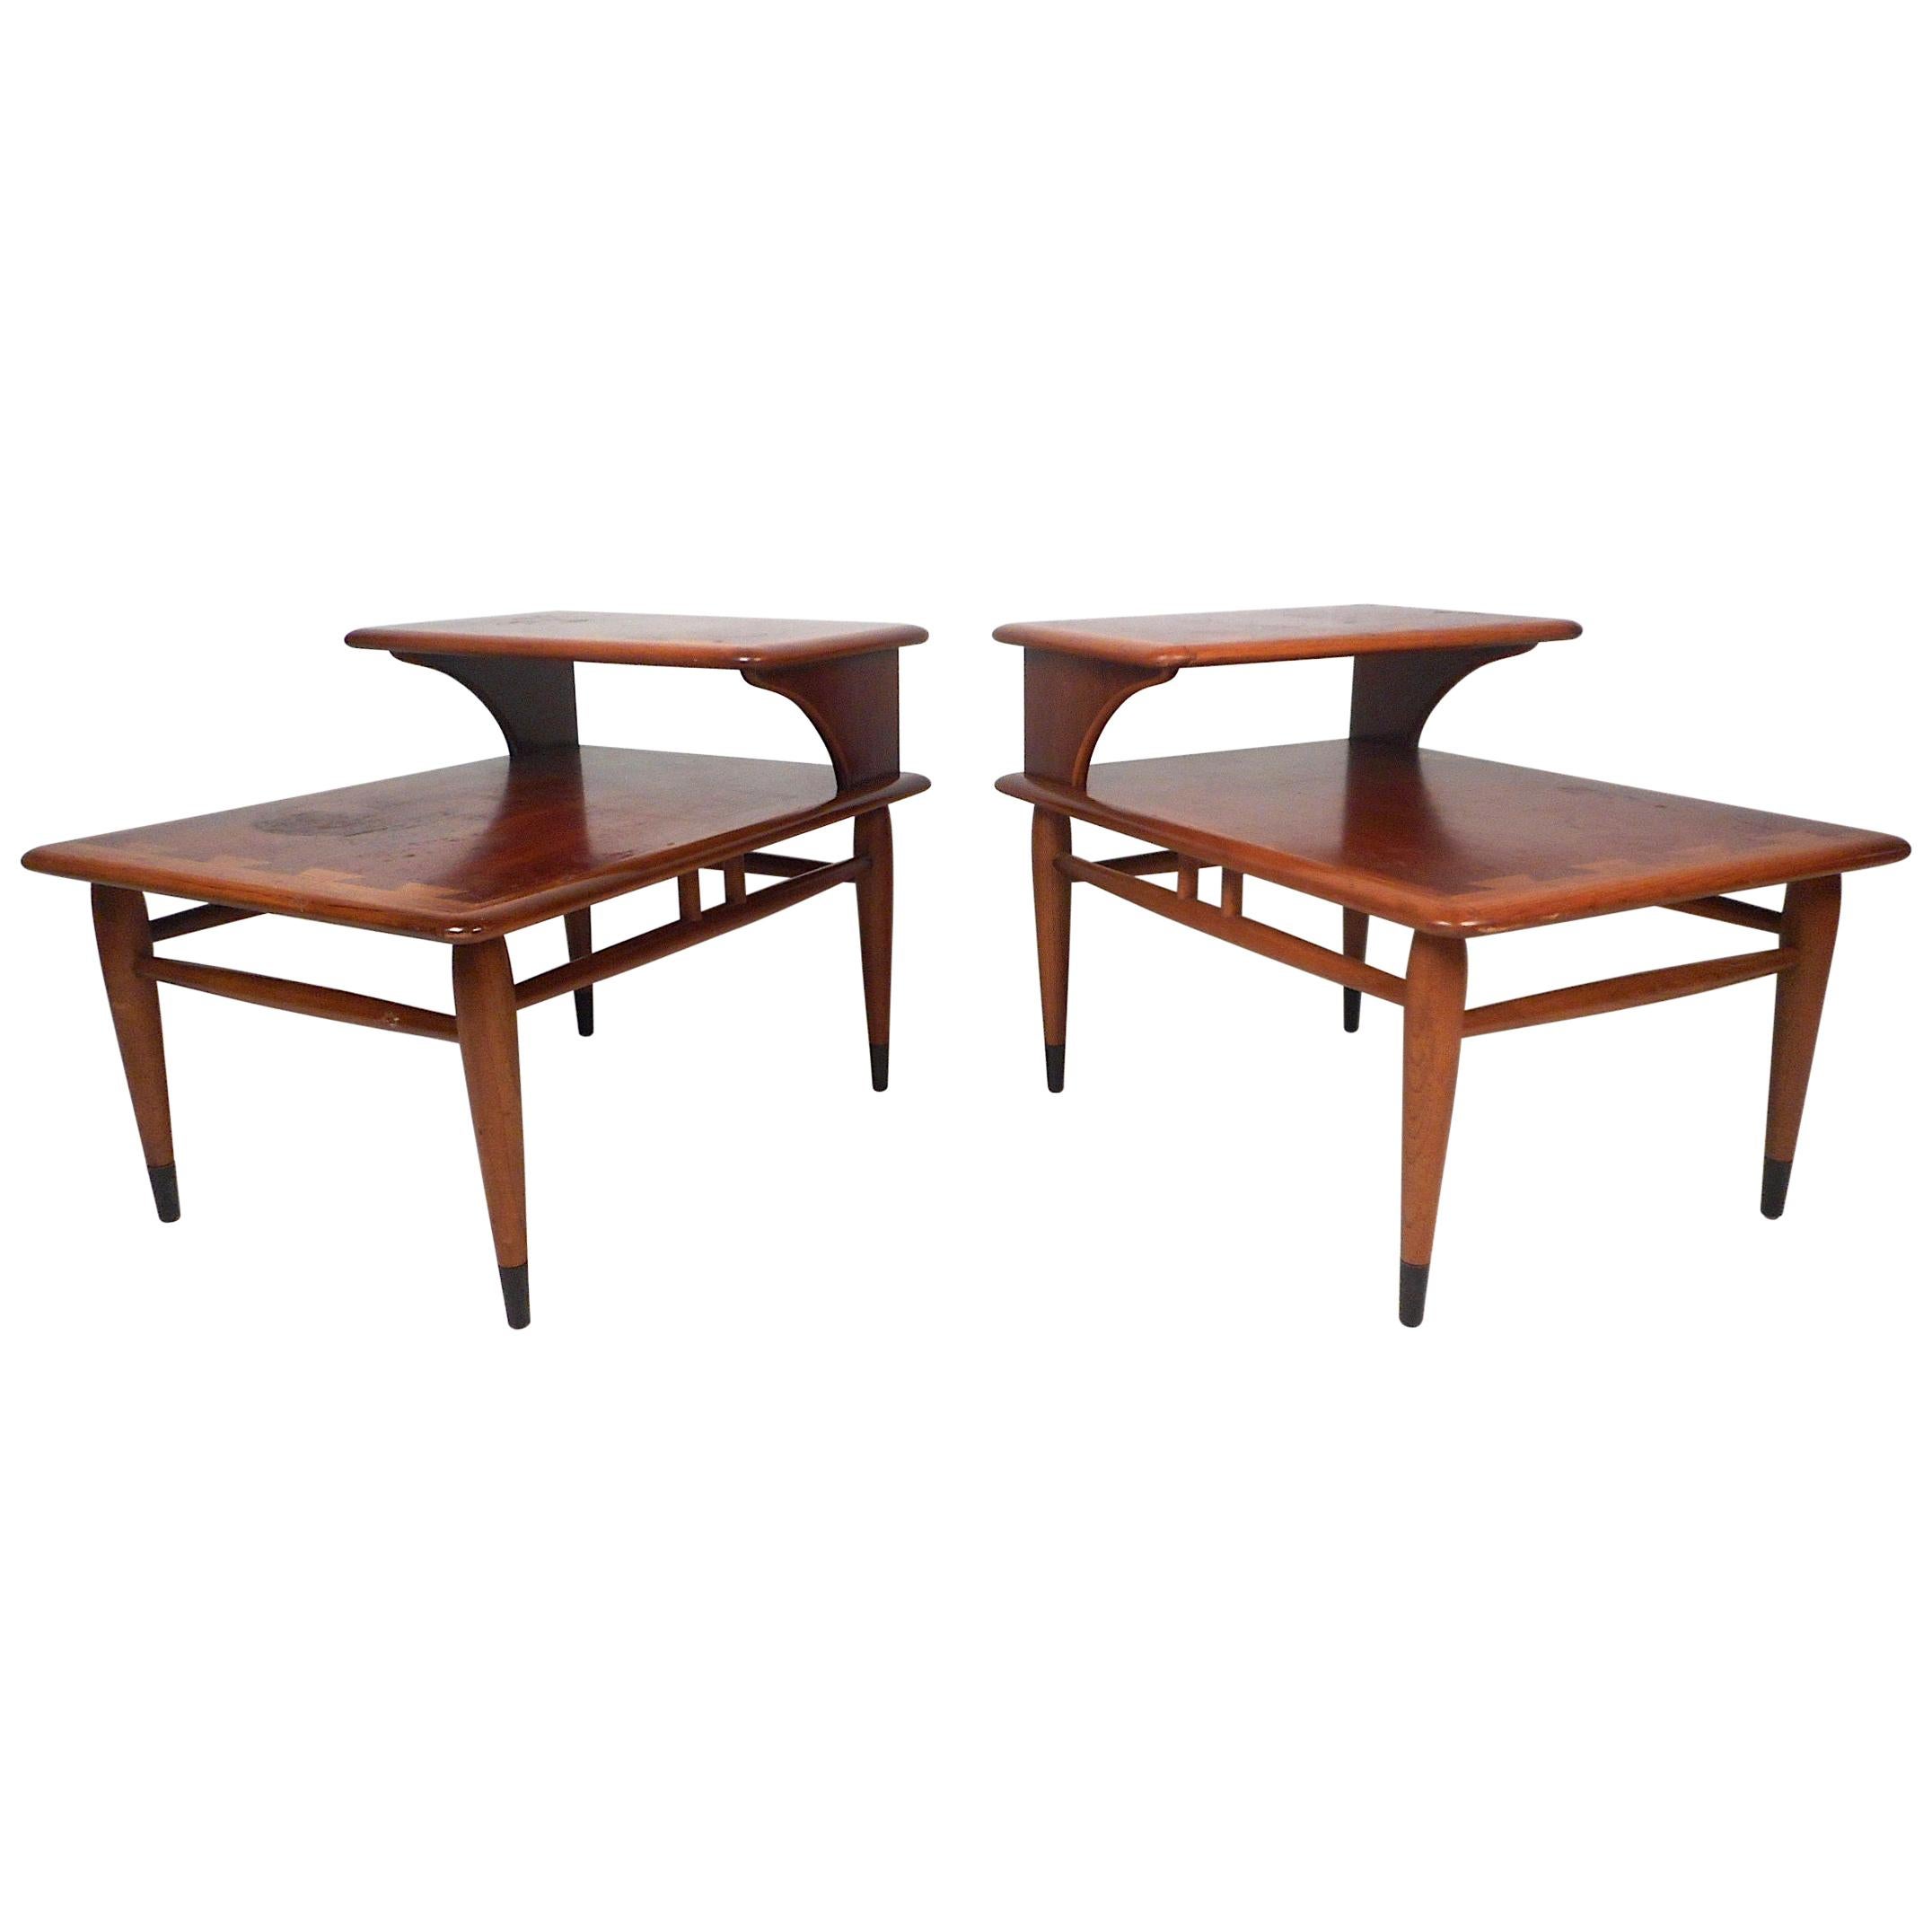 Midcentury Two-Tier End Tables by Lane, a Pair